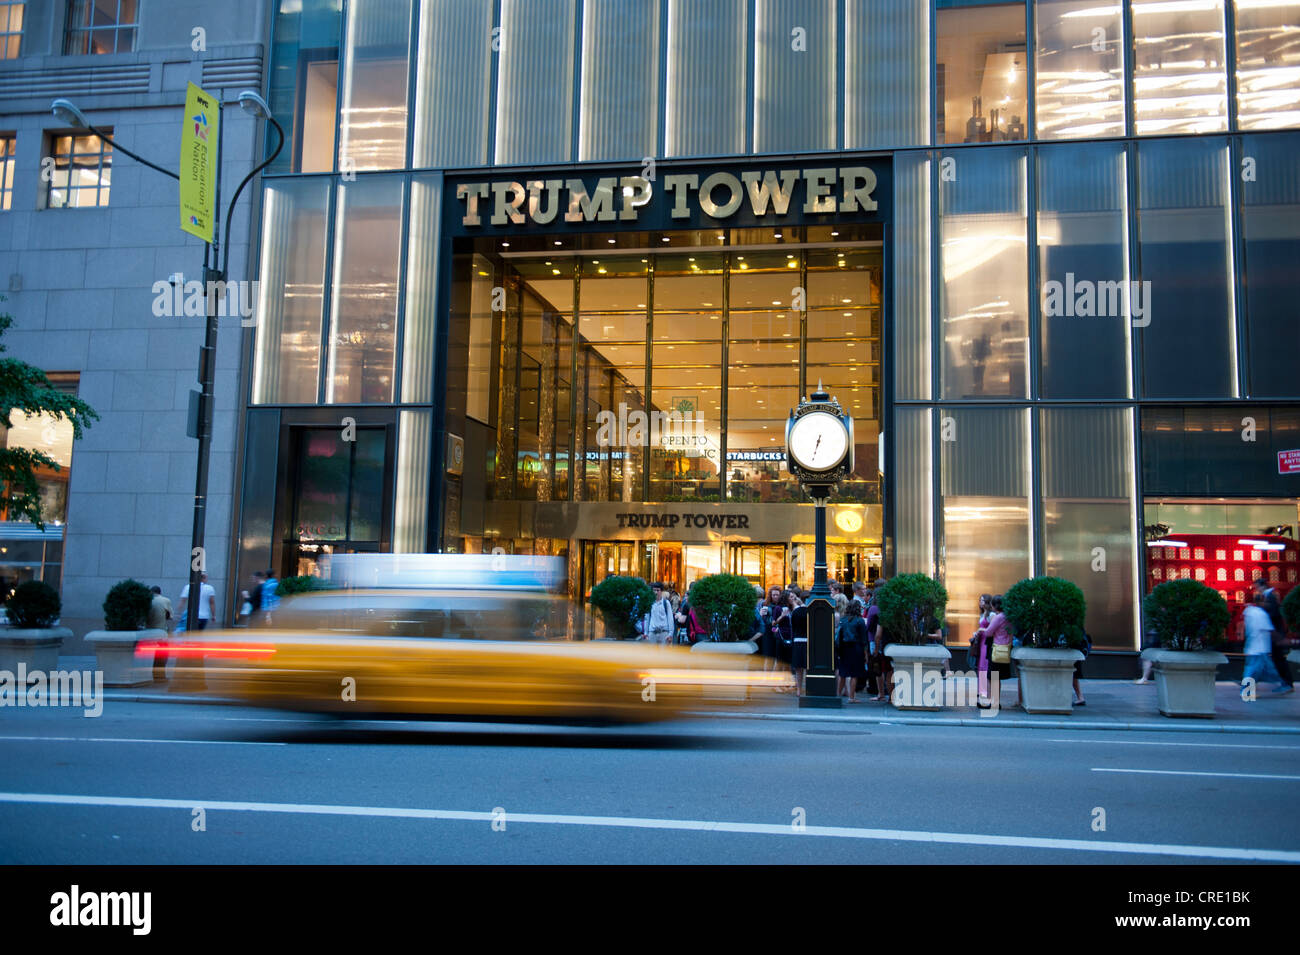 Traffic at dusk, yellow cab, taxi, motion blur, in front of the entrance to Trump Tower, 5th Avenue, Midtown, Manhattan Stock Photo